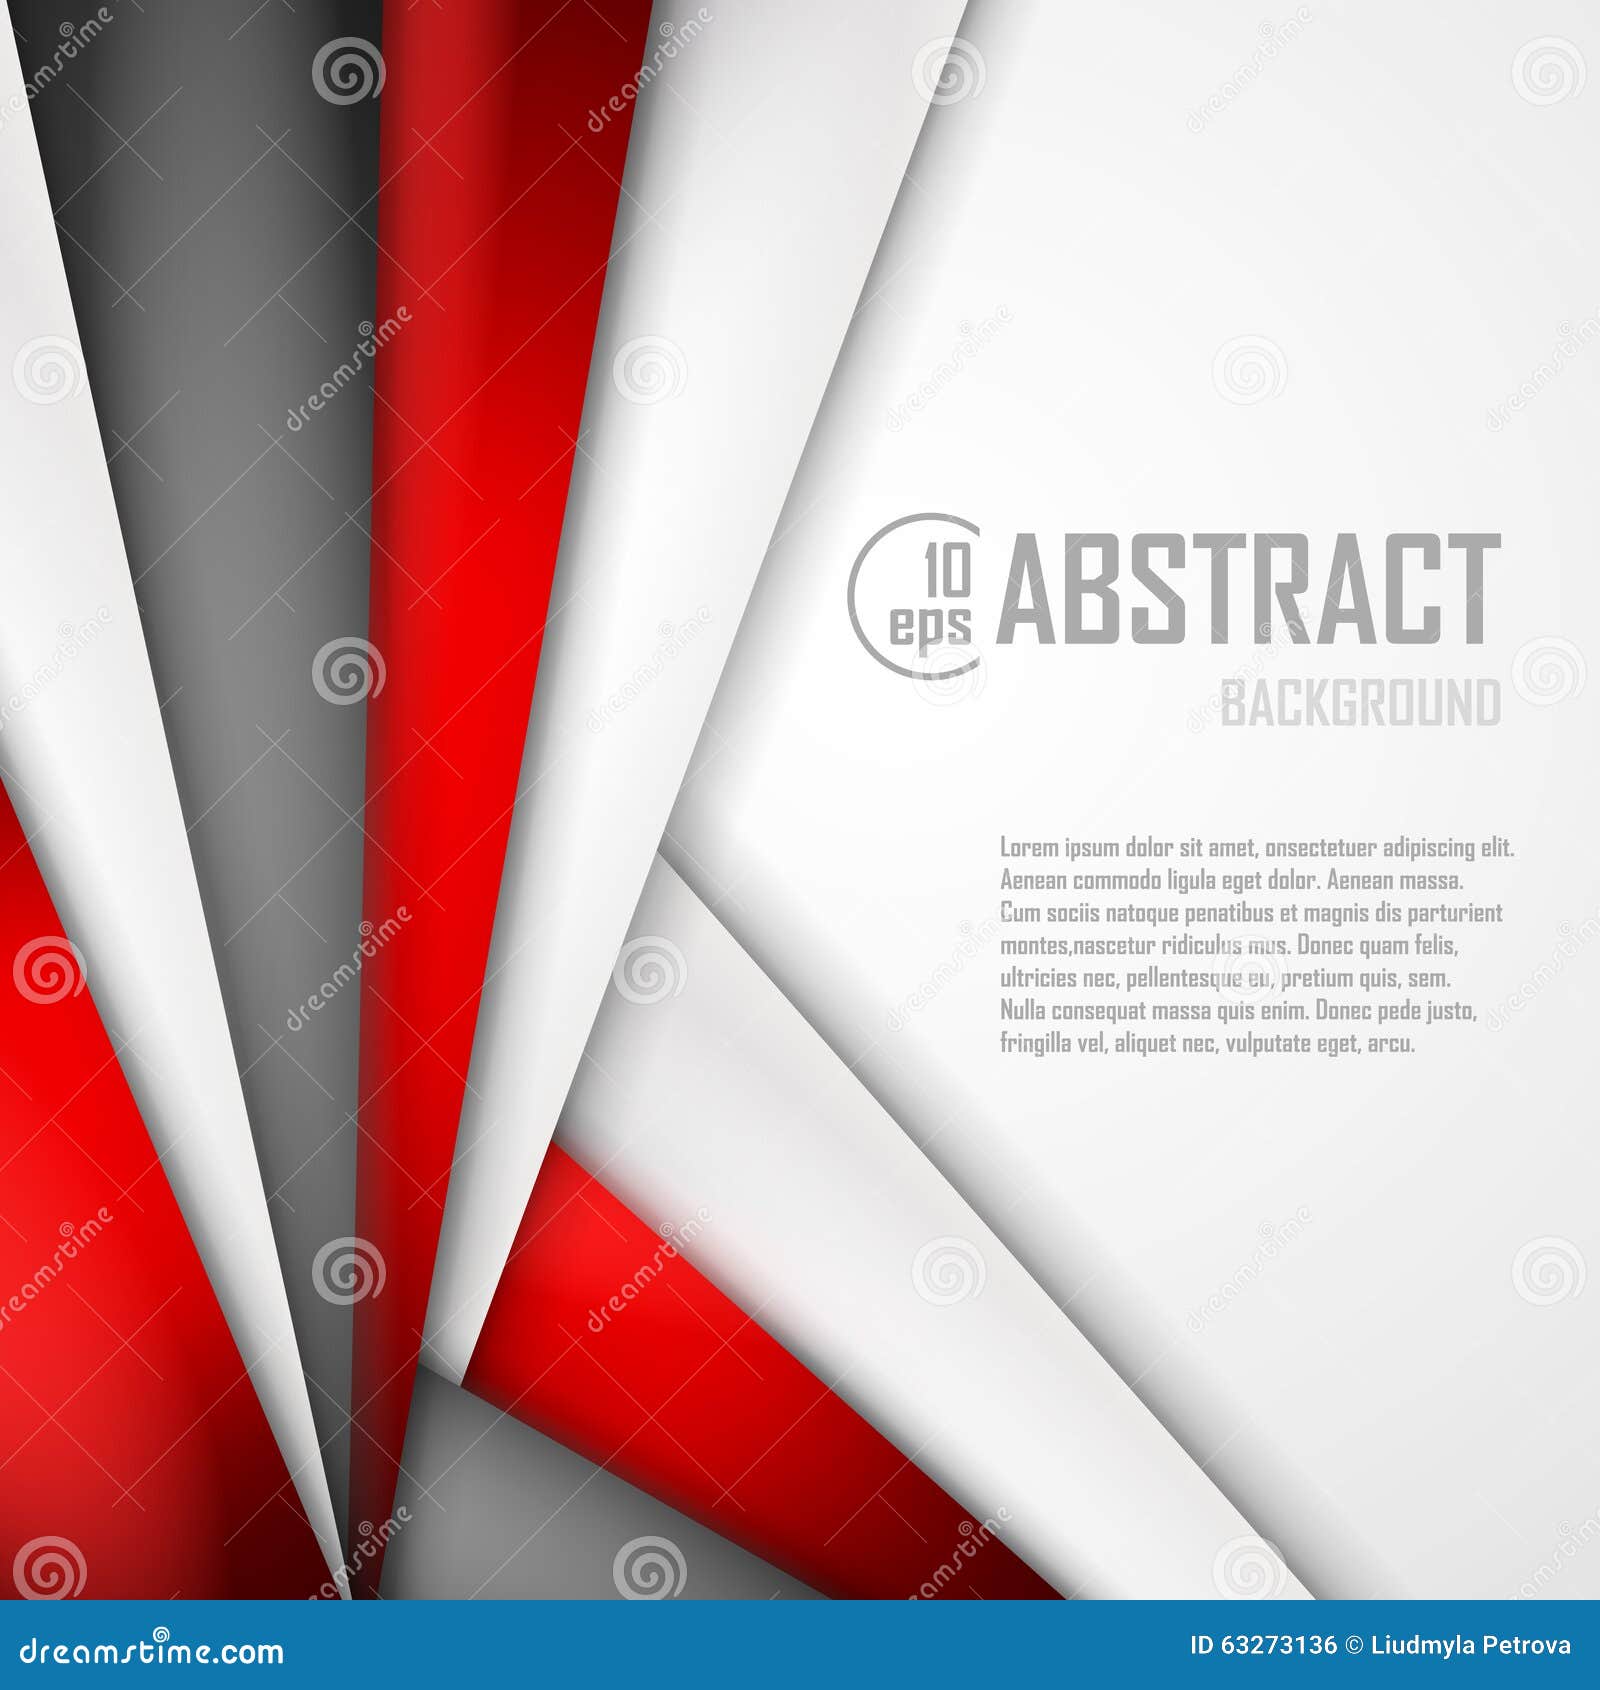 Abstract background of red and white origami paper